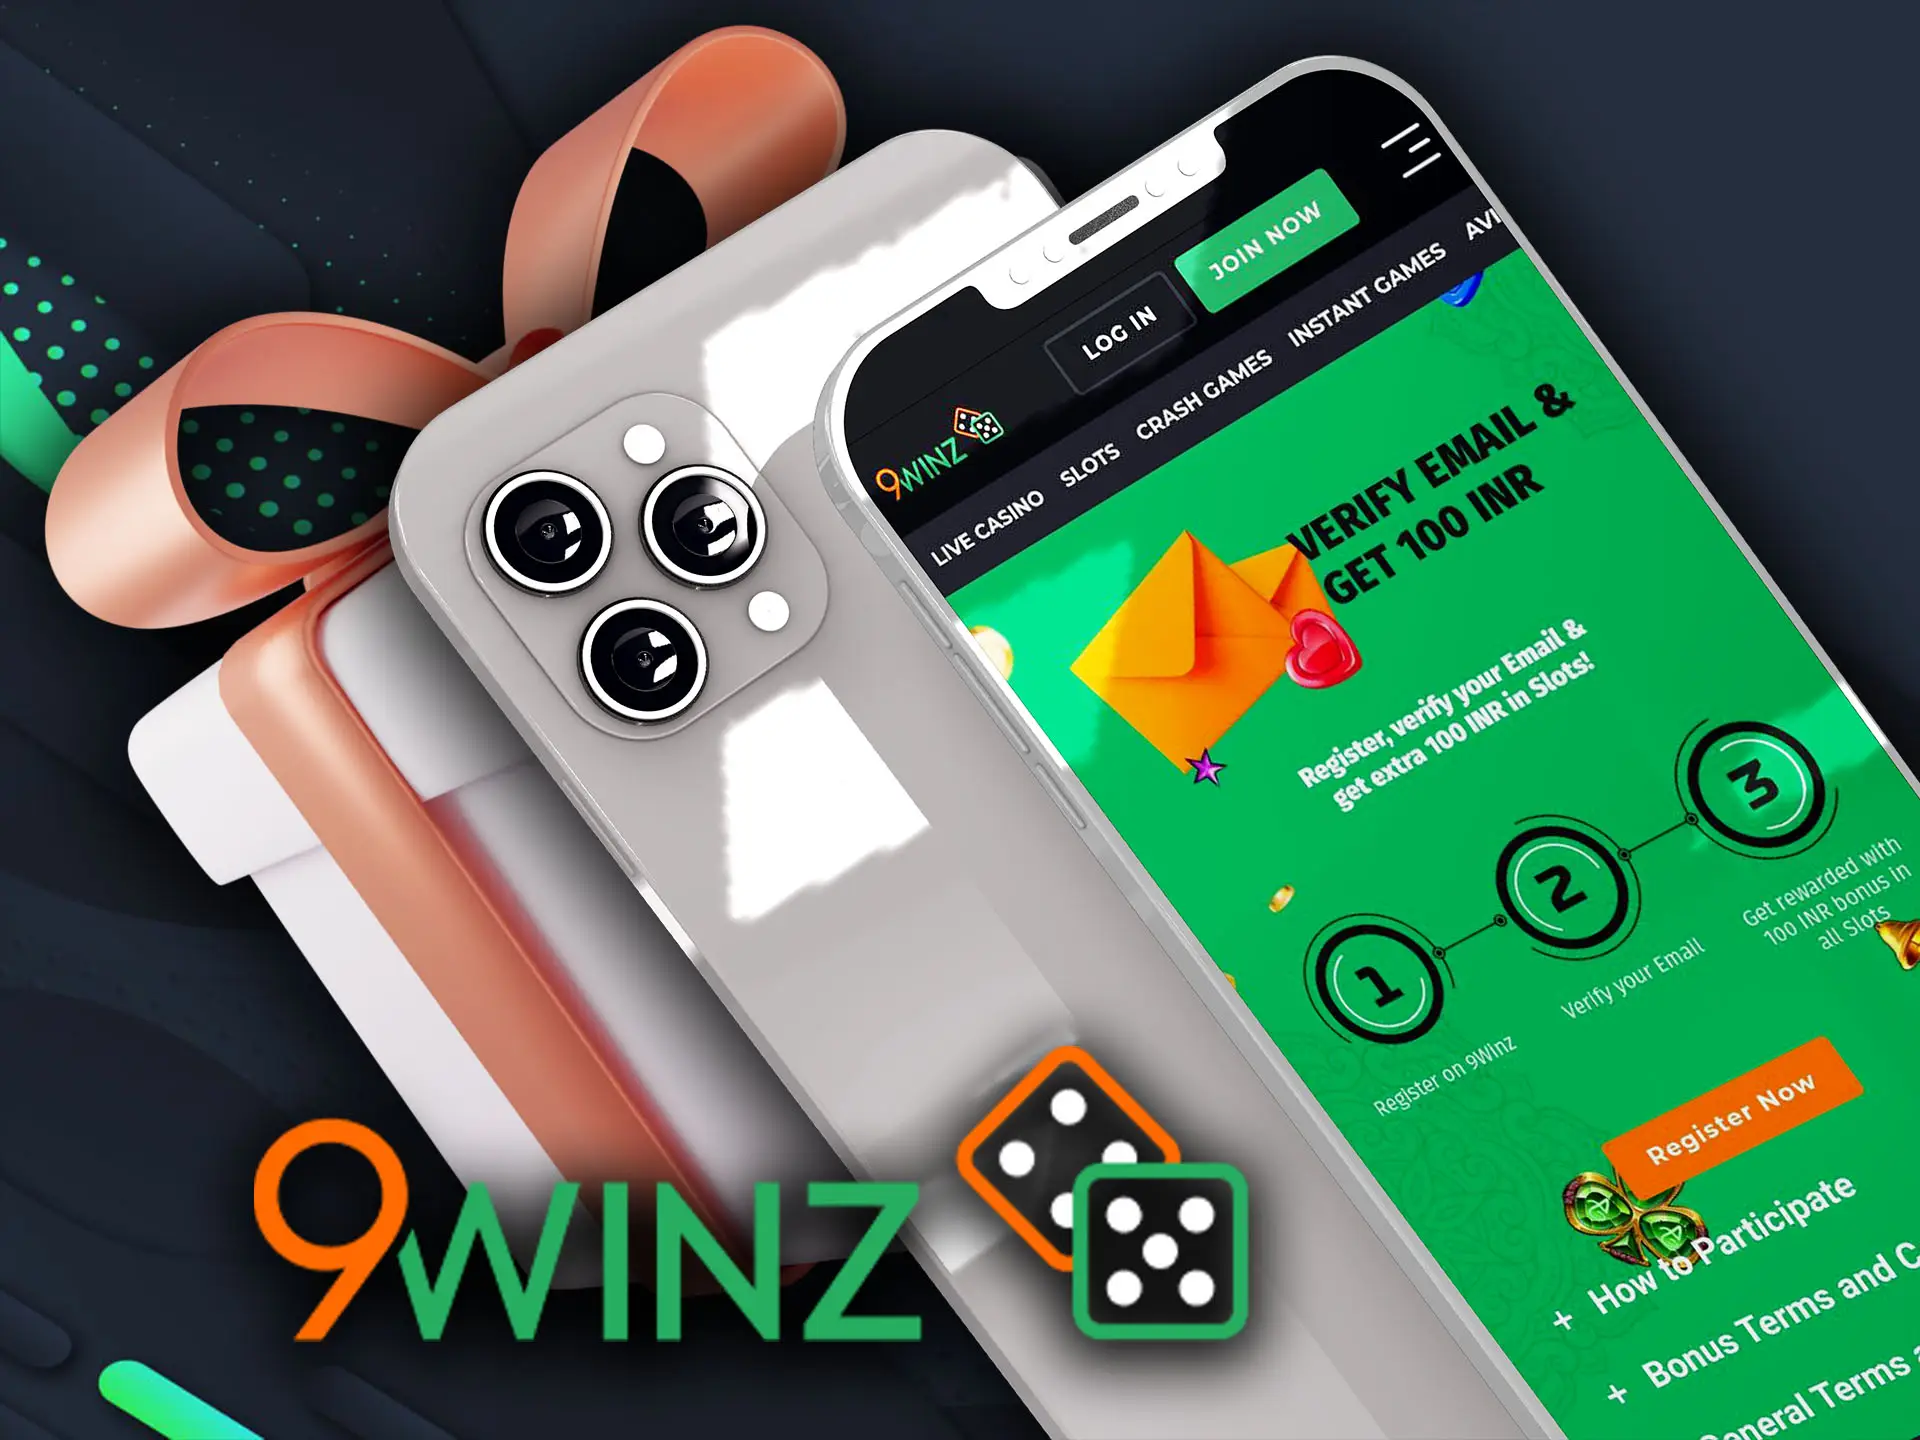 Get additional money after verifying your 9winz account in mobile version.